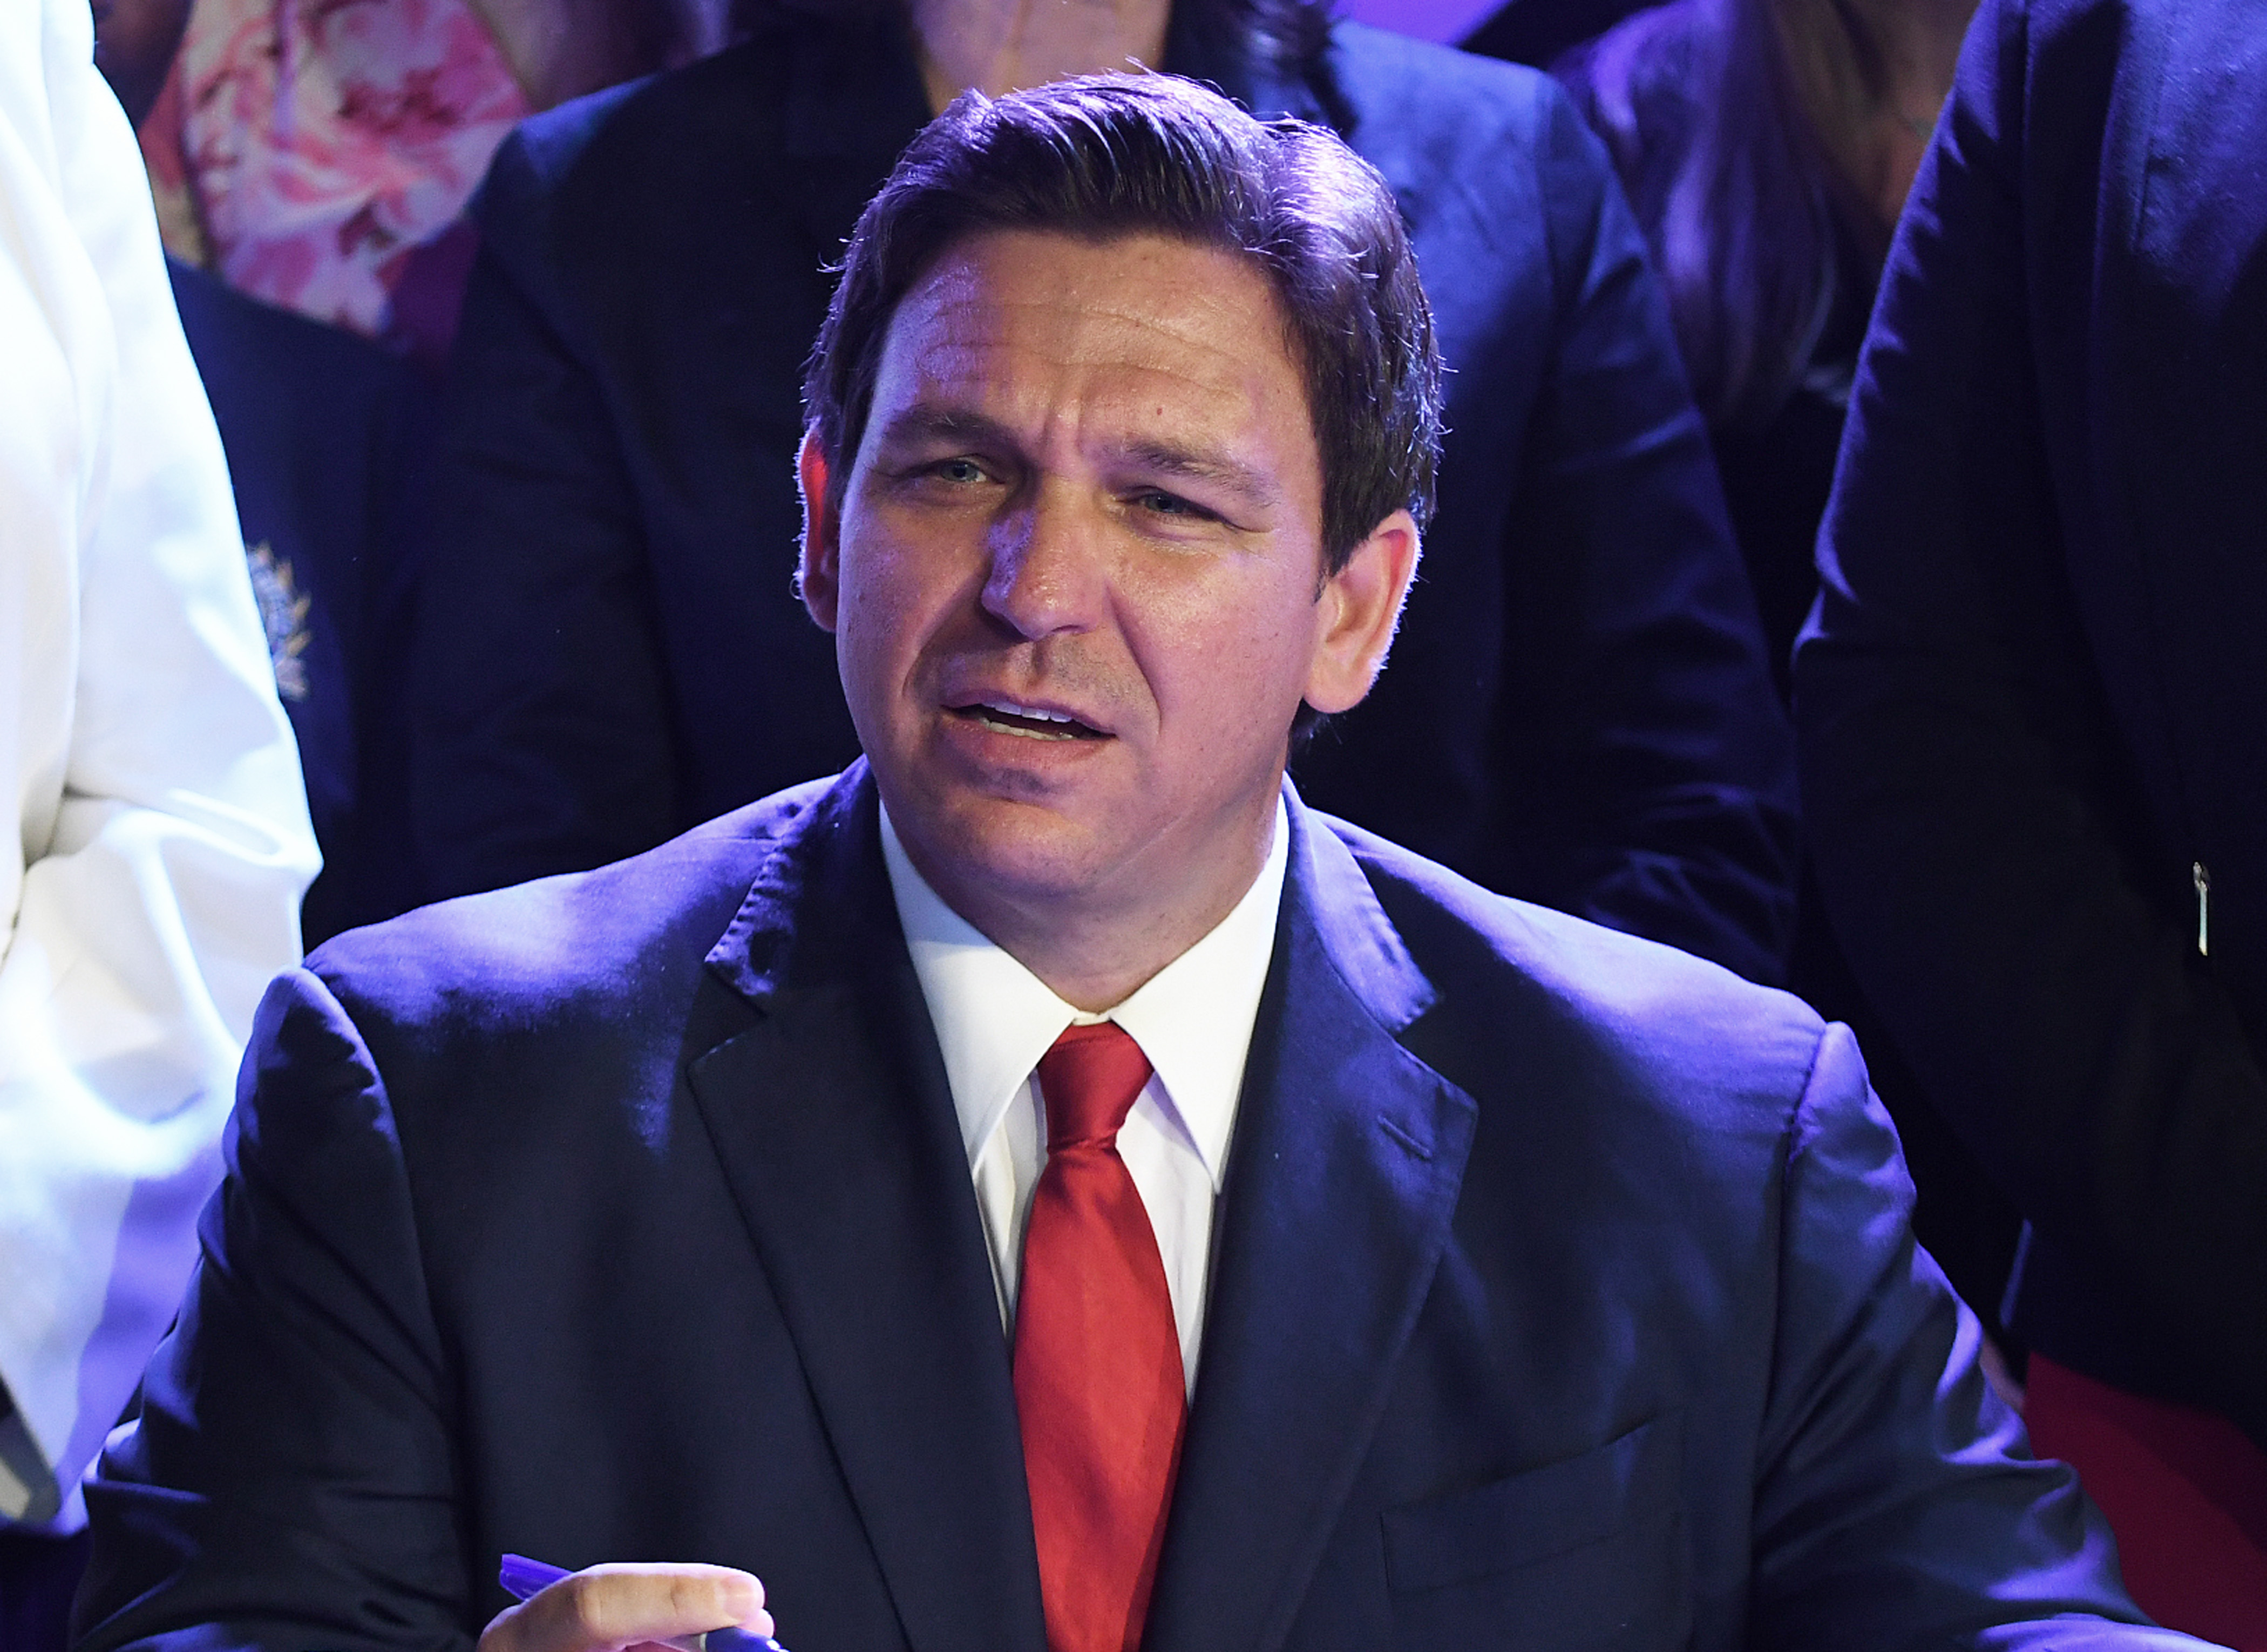 Florida Gov. DeSantis signed a law to dissolve Disney's private government. But the district still doesn't know what that means